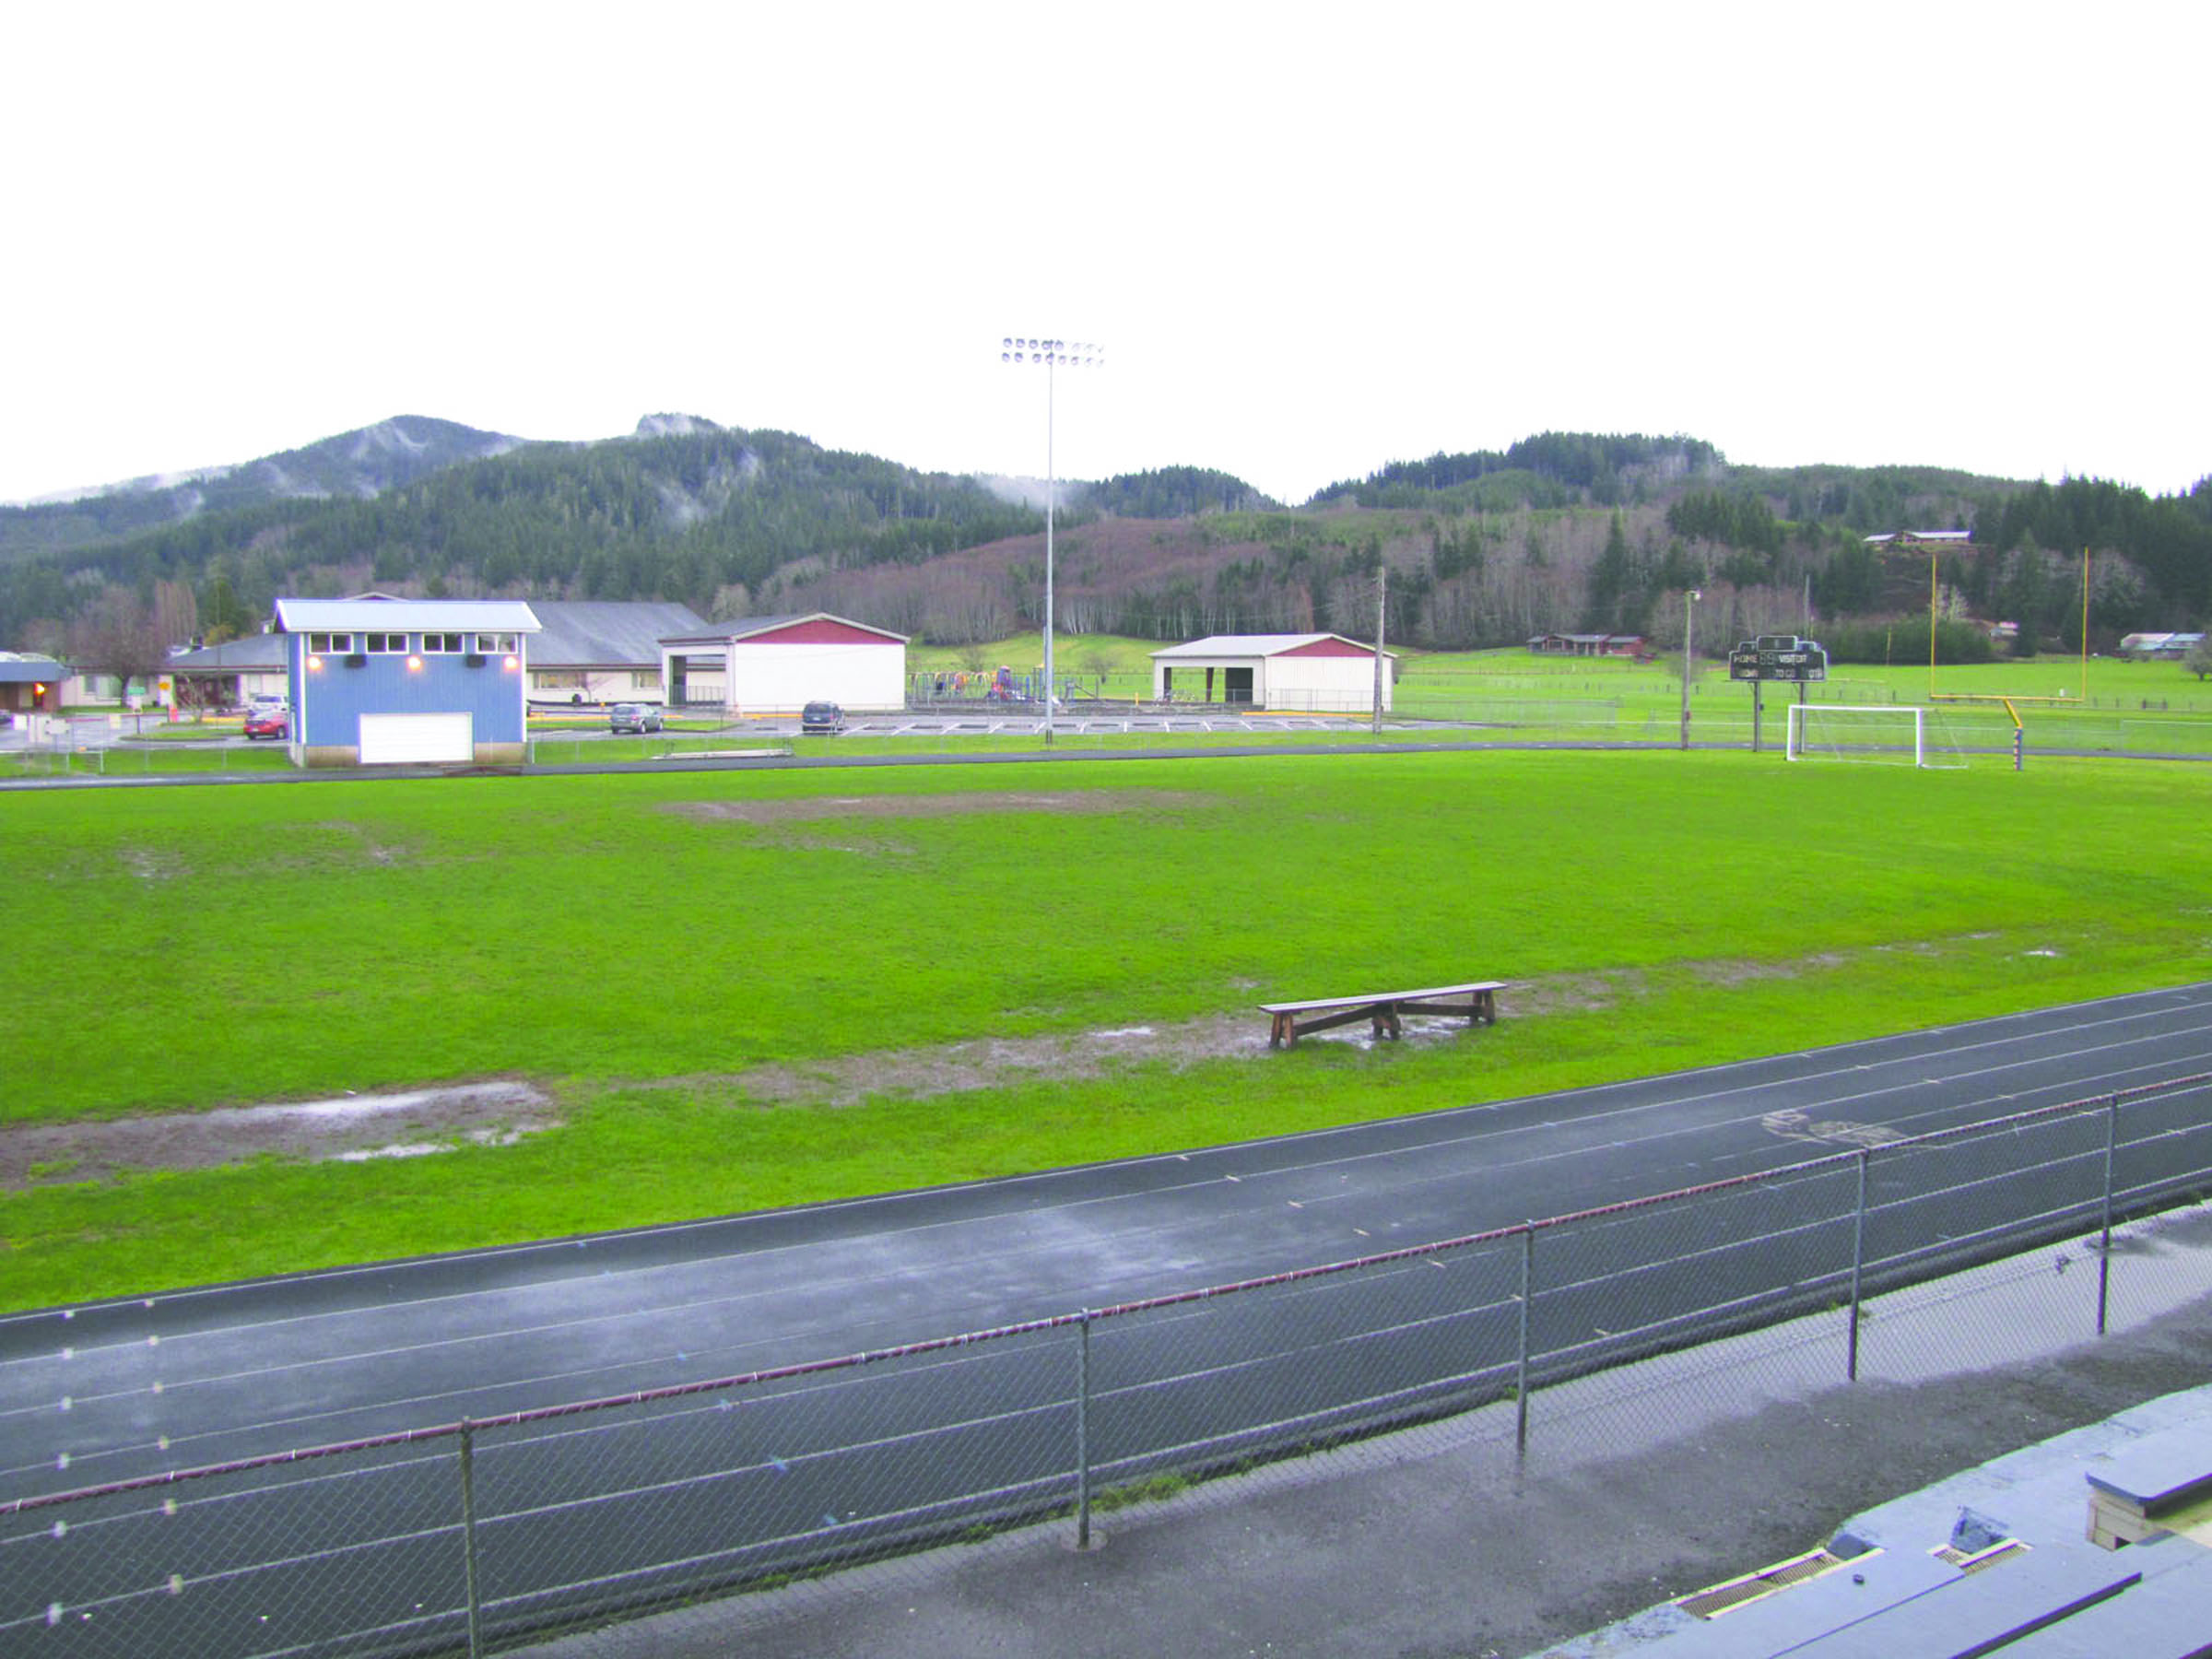 The muddy football field at Forks High School is expected to undergo a major transformation into a $1.25 million artificial turf field with a freshly resurfaced track this summer. (Arwyn Rice/Peninsula Daily News)